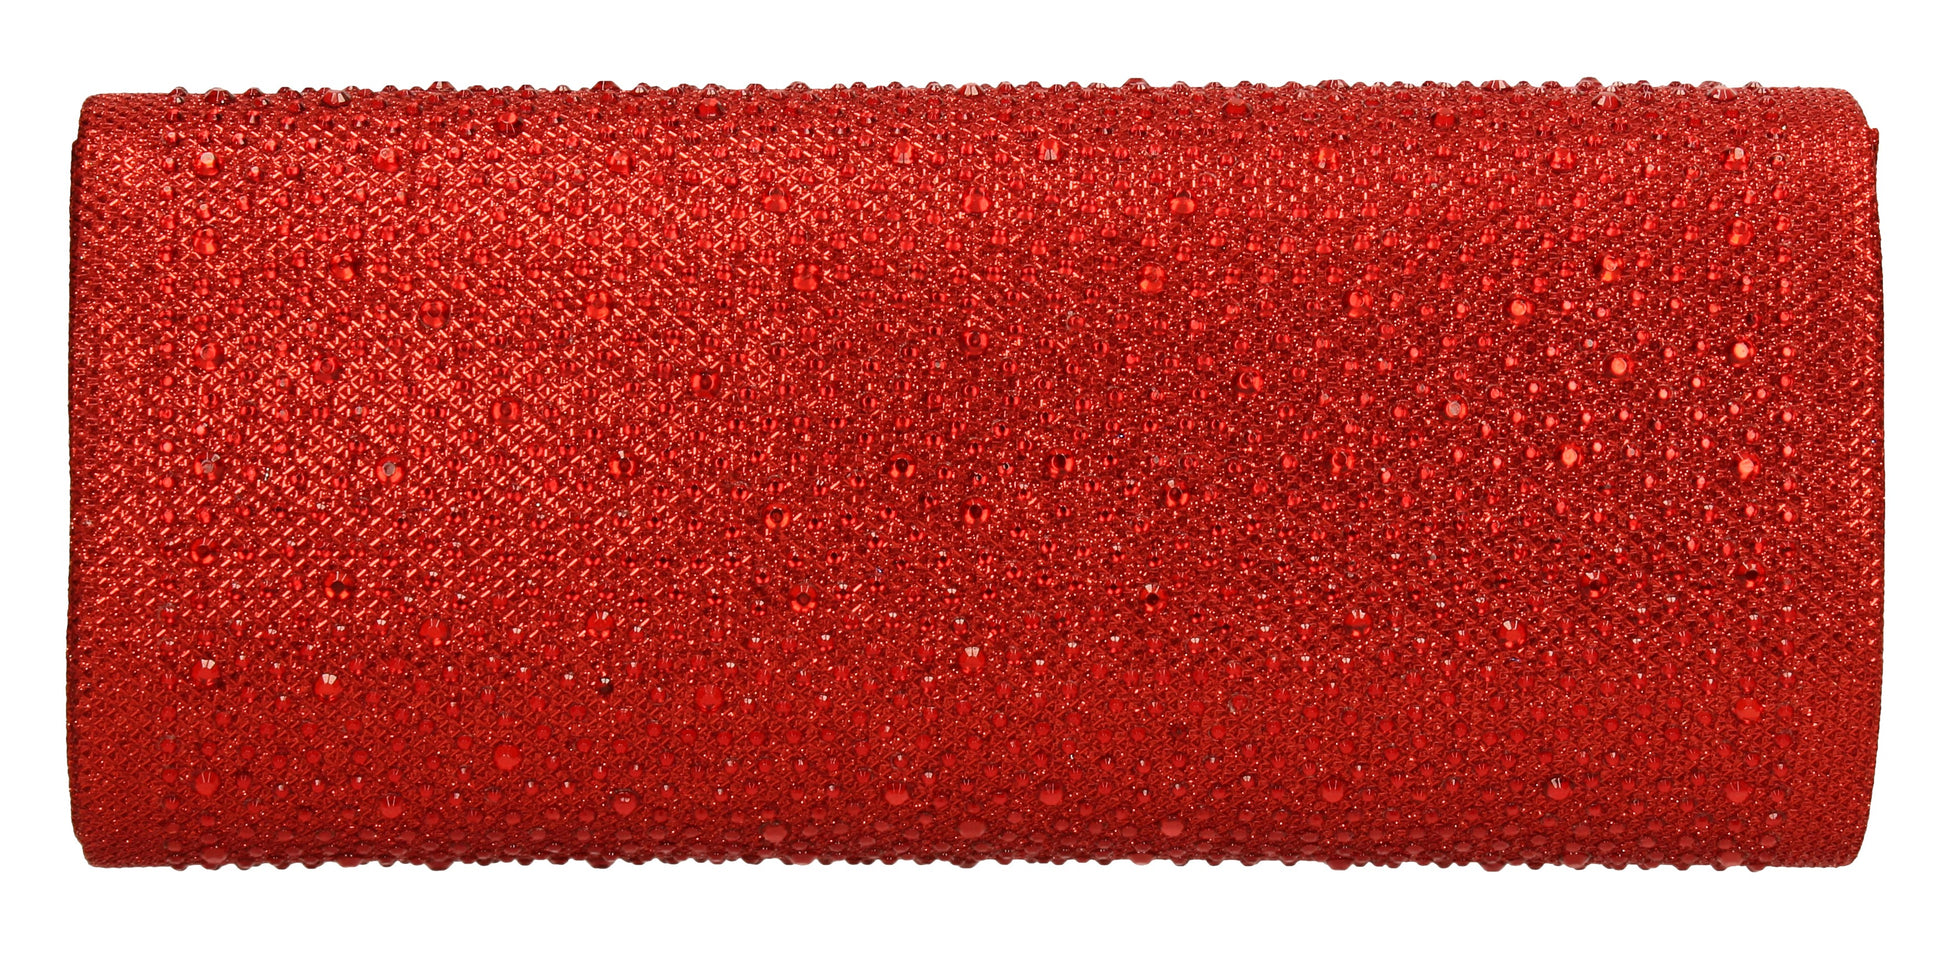 SWANKYSWANS Esther Glitter Diamante Clutch Bag Red Cute Cheap Clutch Bag For Weddings School and Work